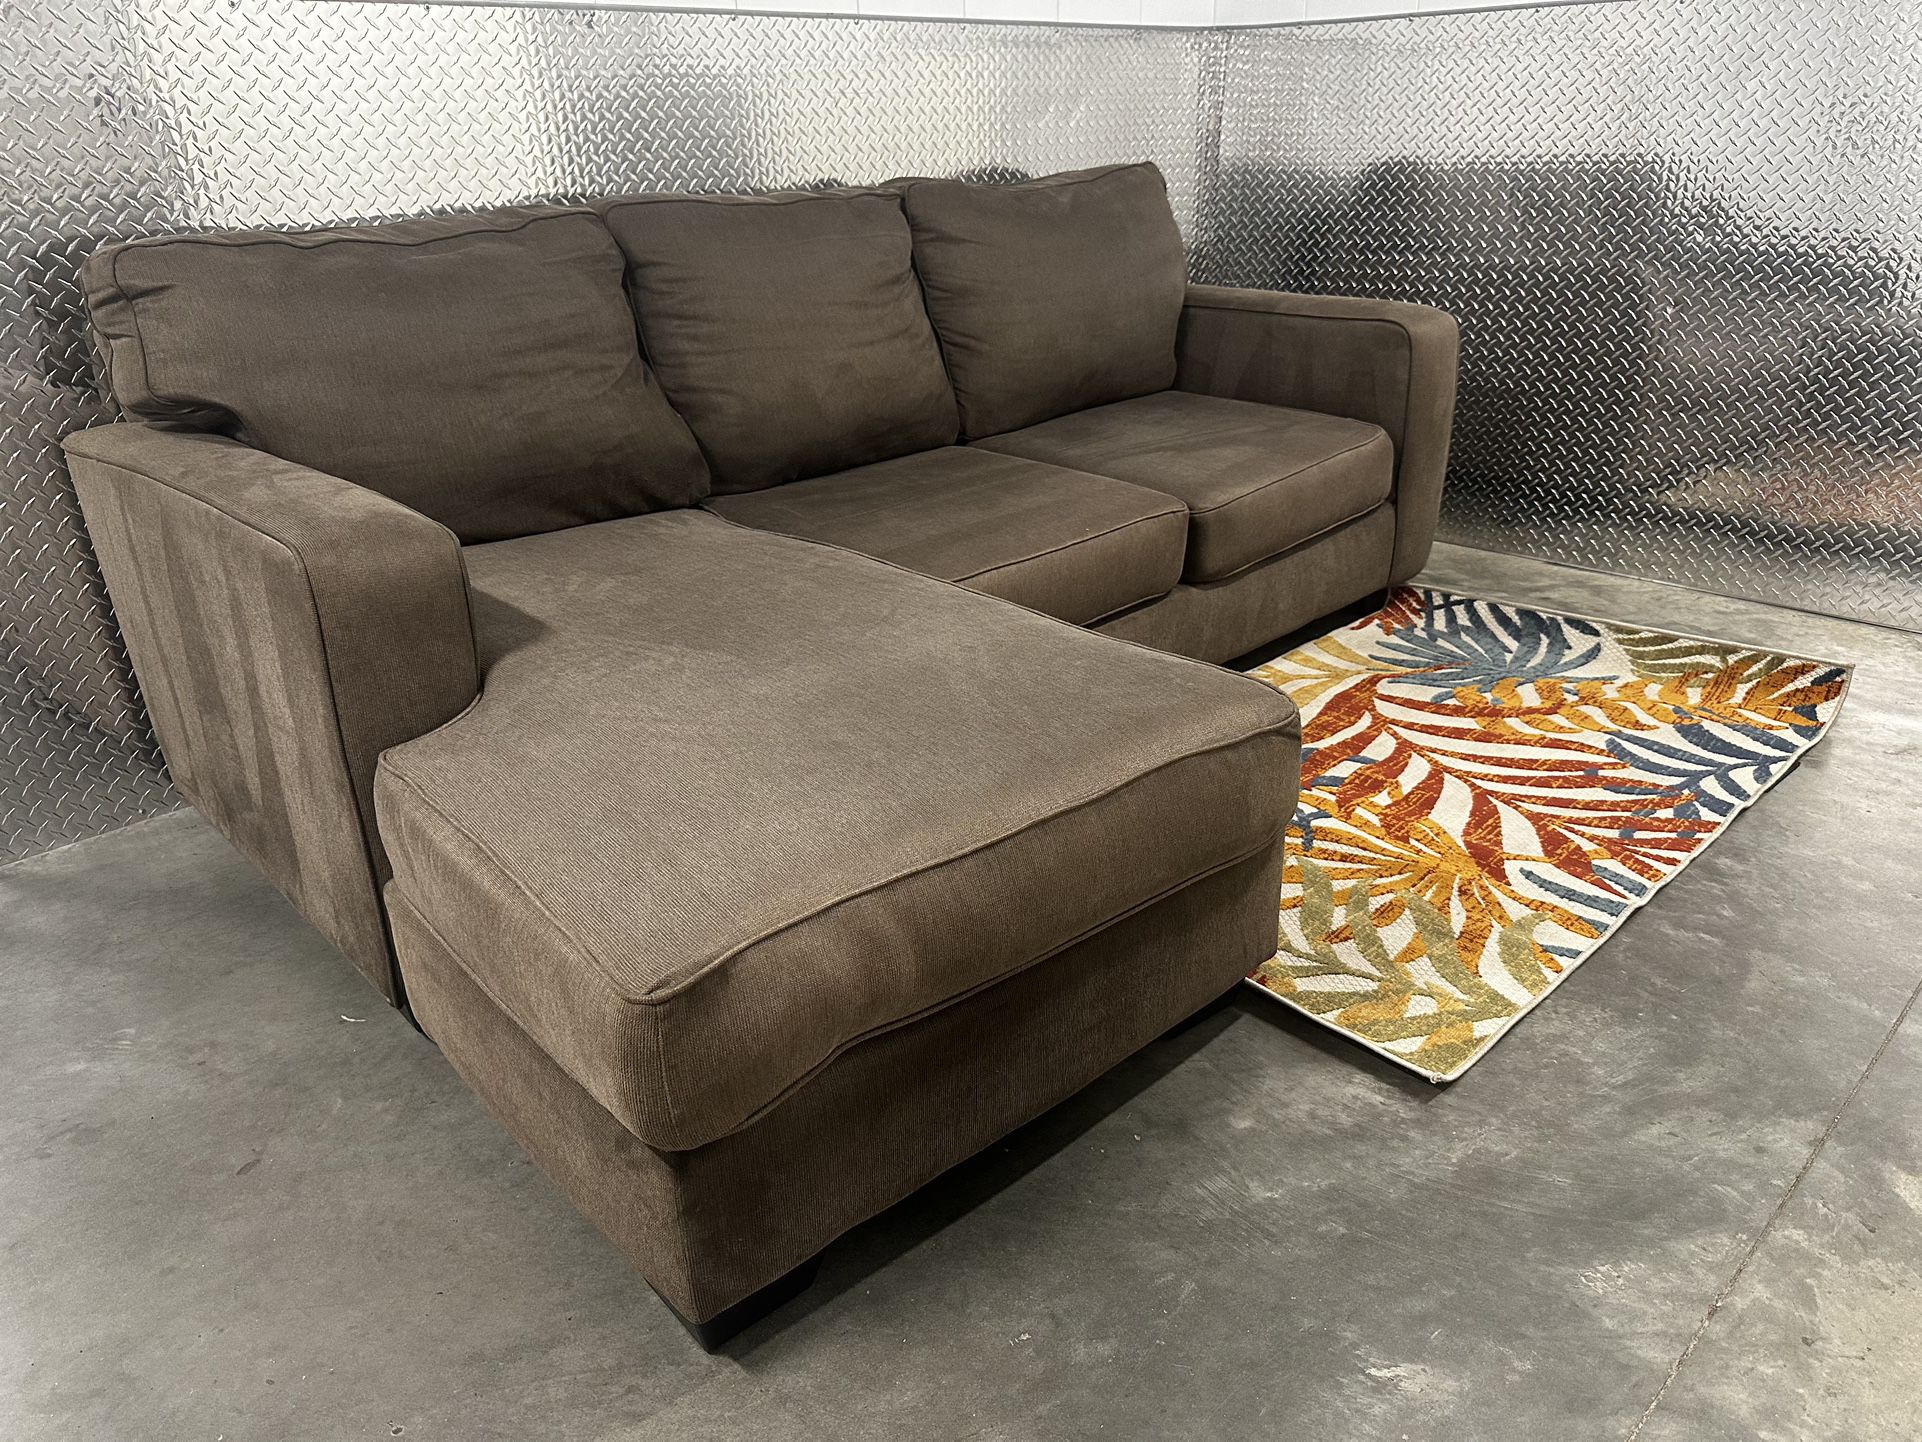 GRAY SECTIONAL COUCH W/ FREE DELIVERY 